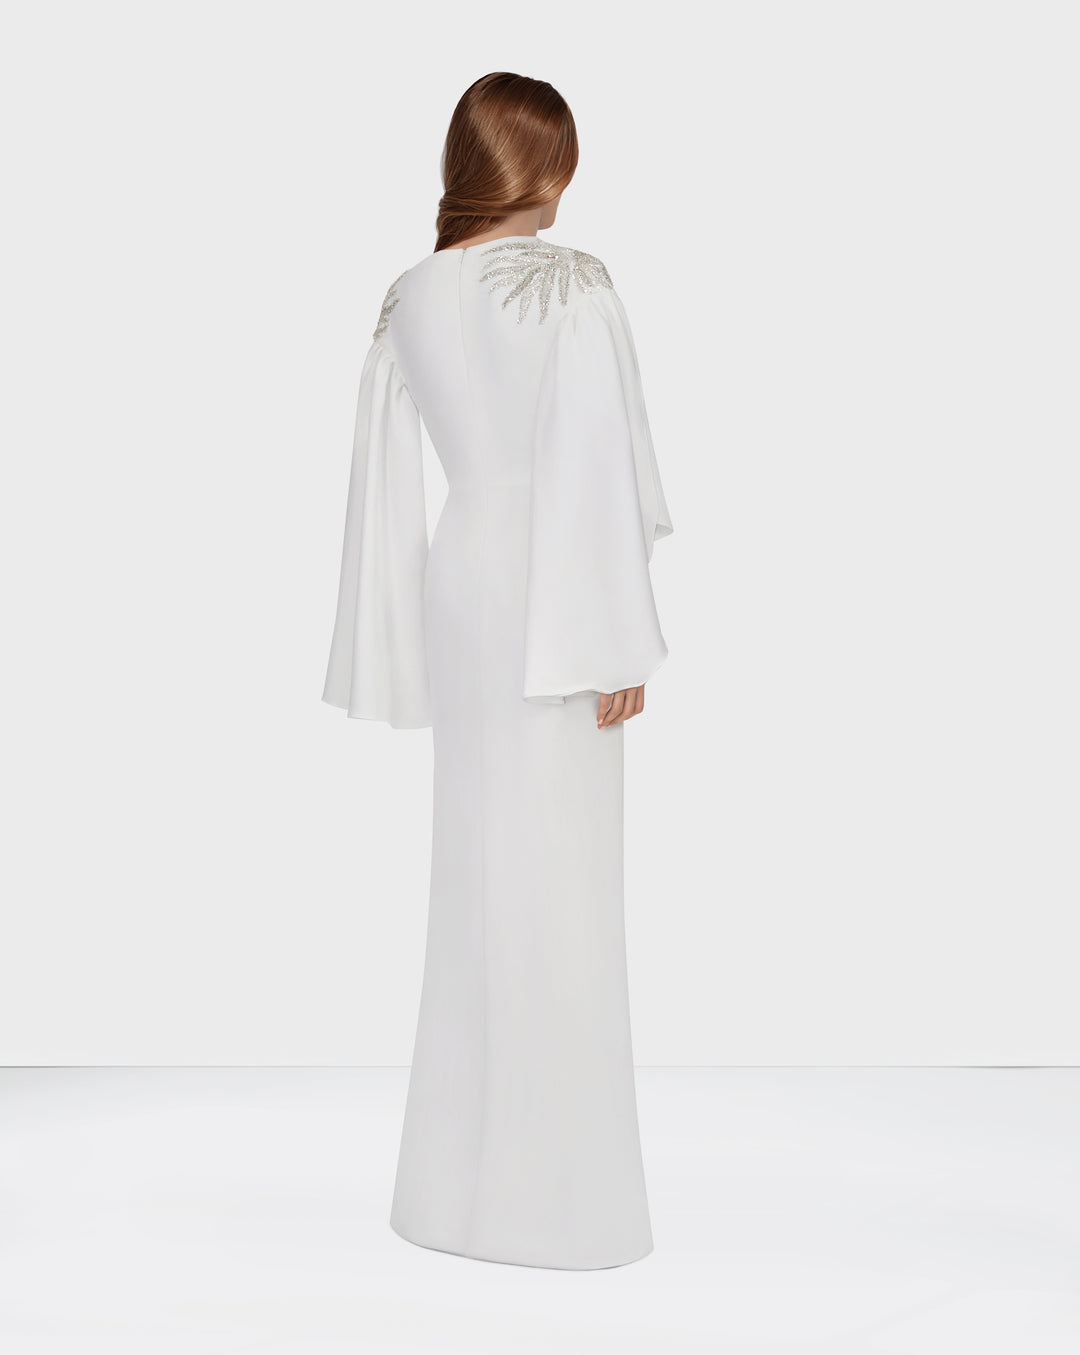 White column dress with ruffled sleeves and sequined shoulders